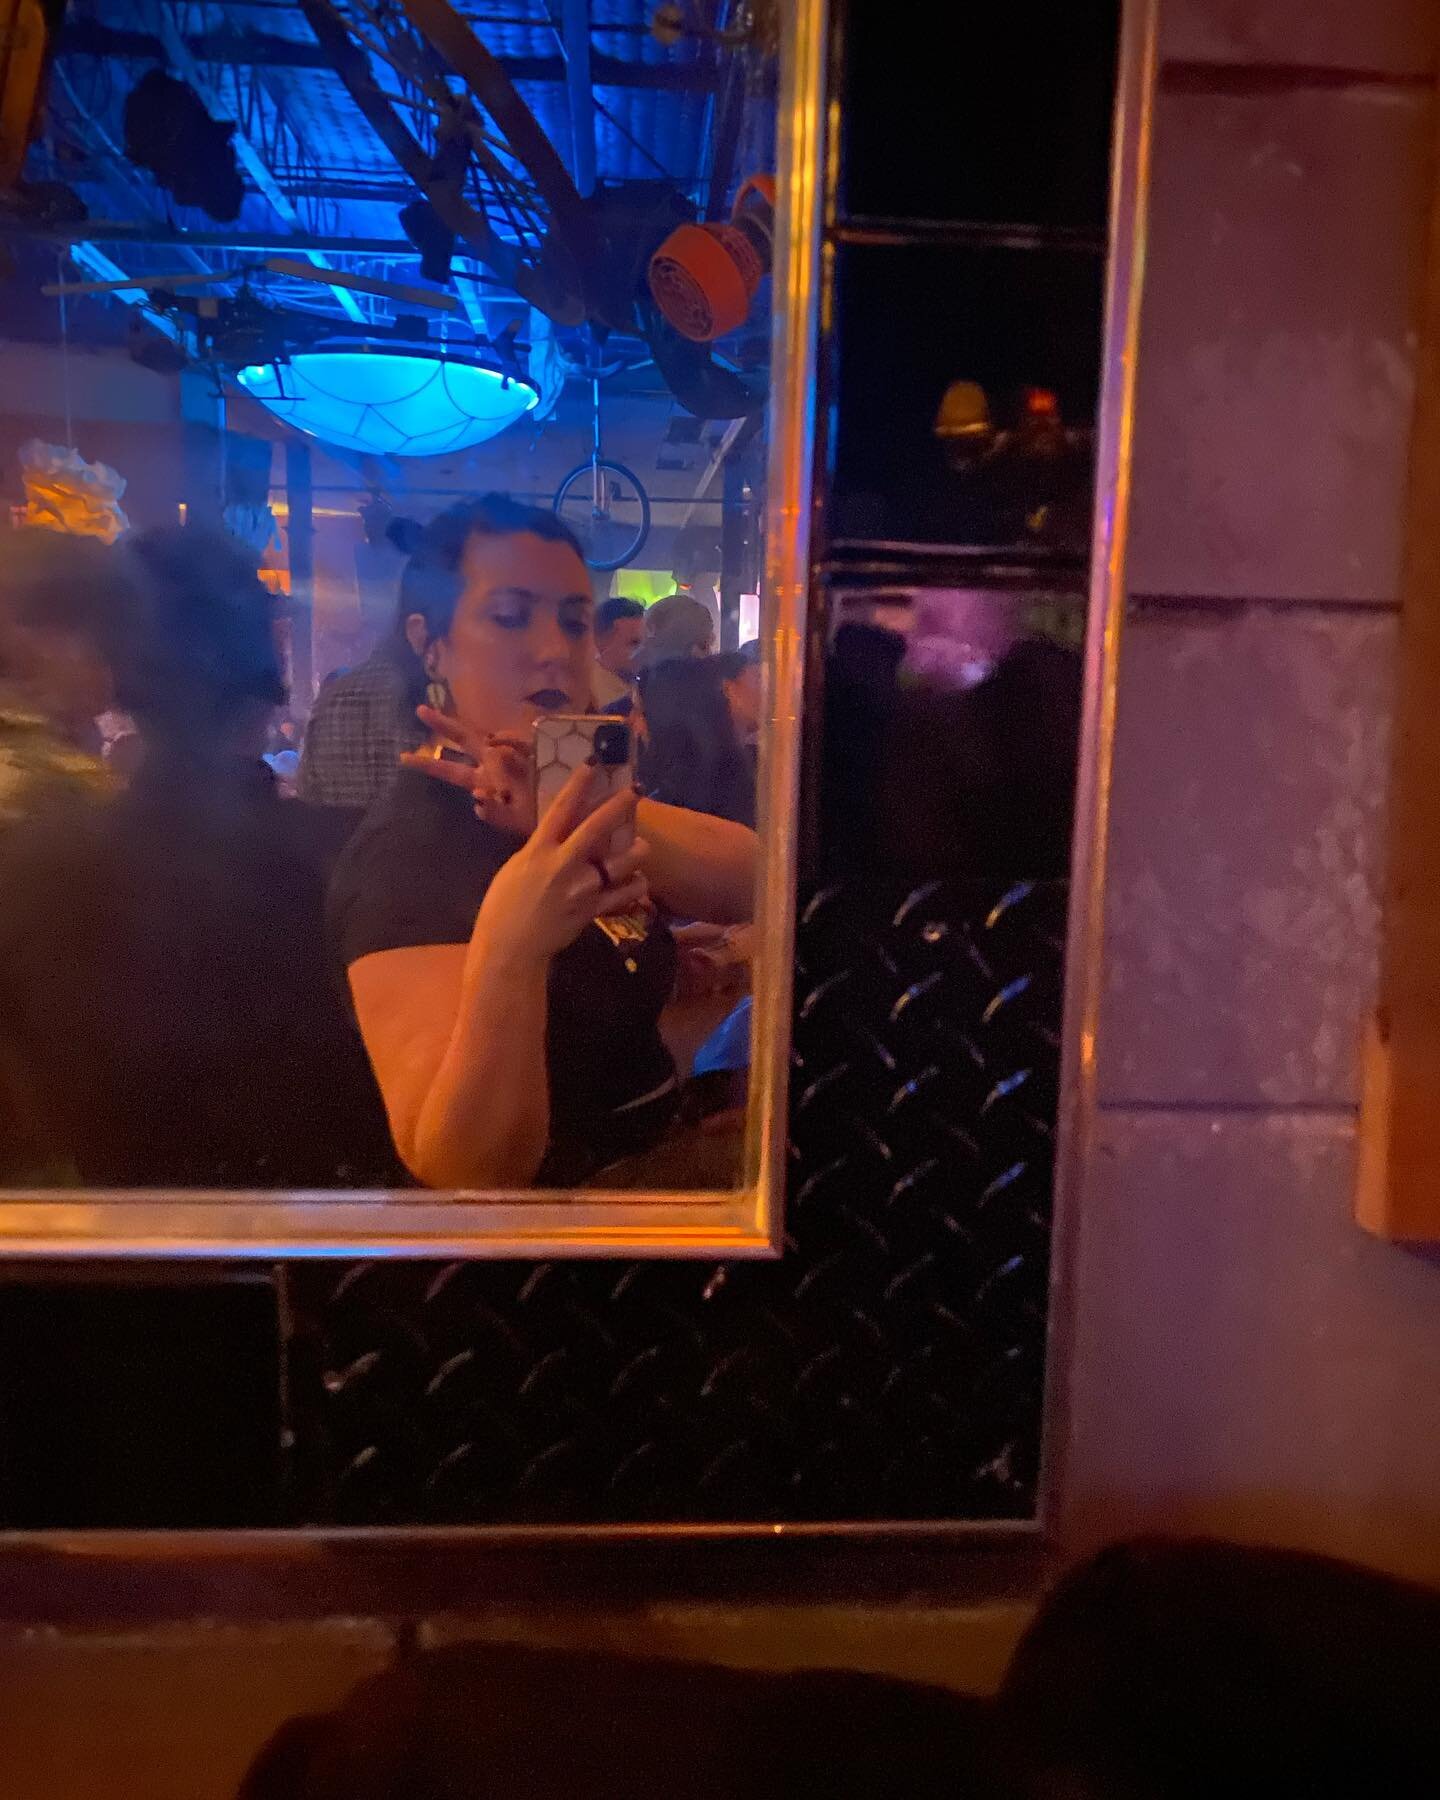 Cool mirrors in crowded bars